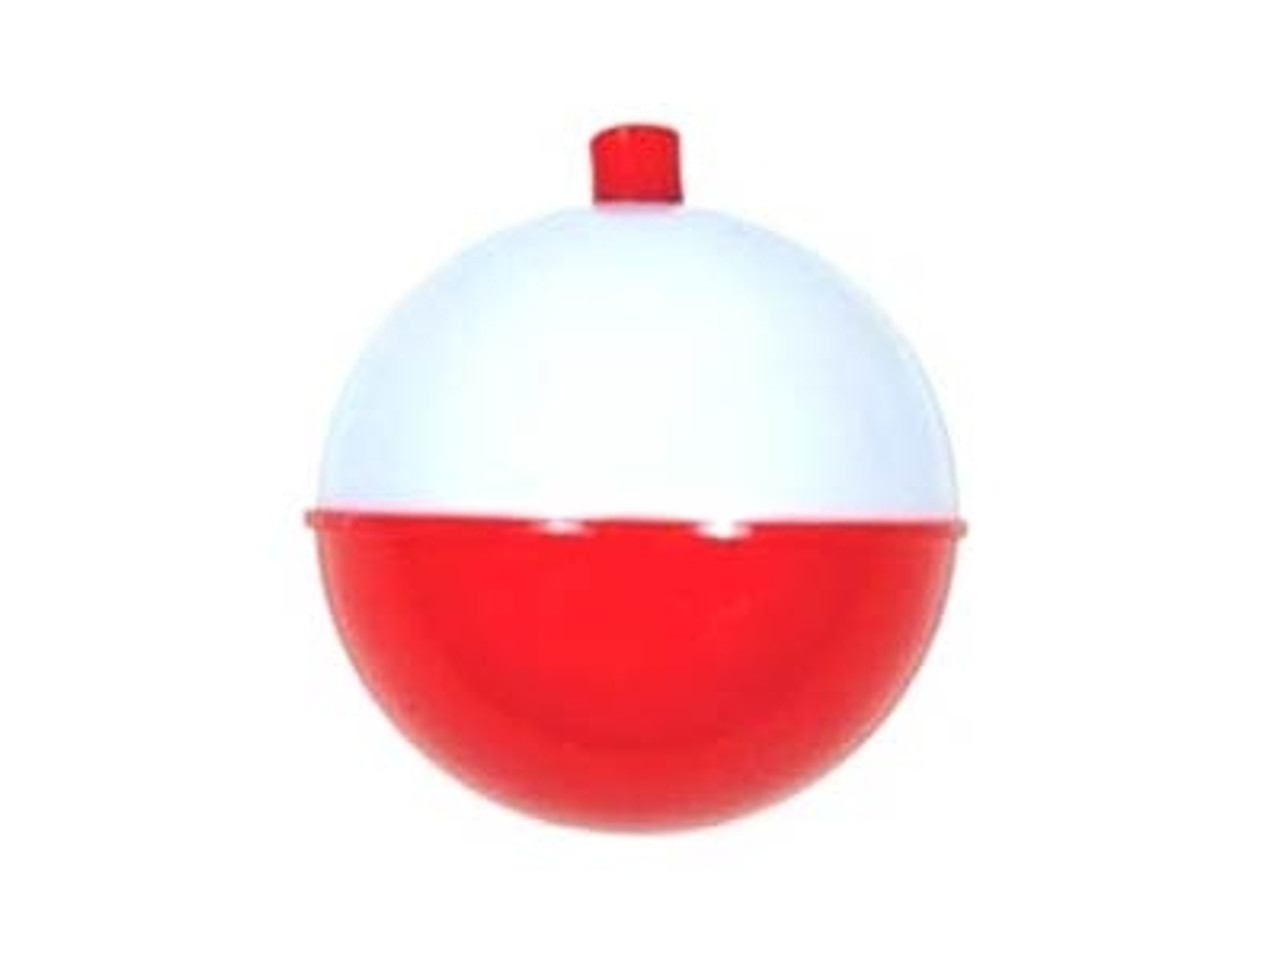 Eagle Claw Snap-On Round Floats Red White